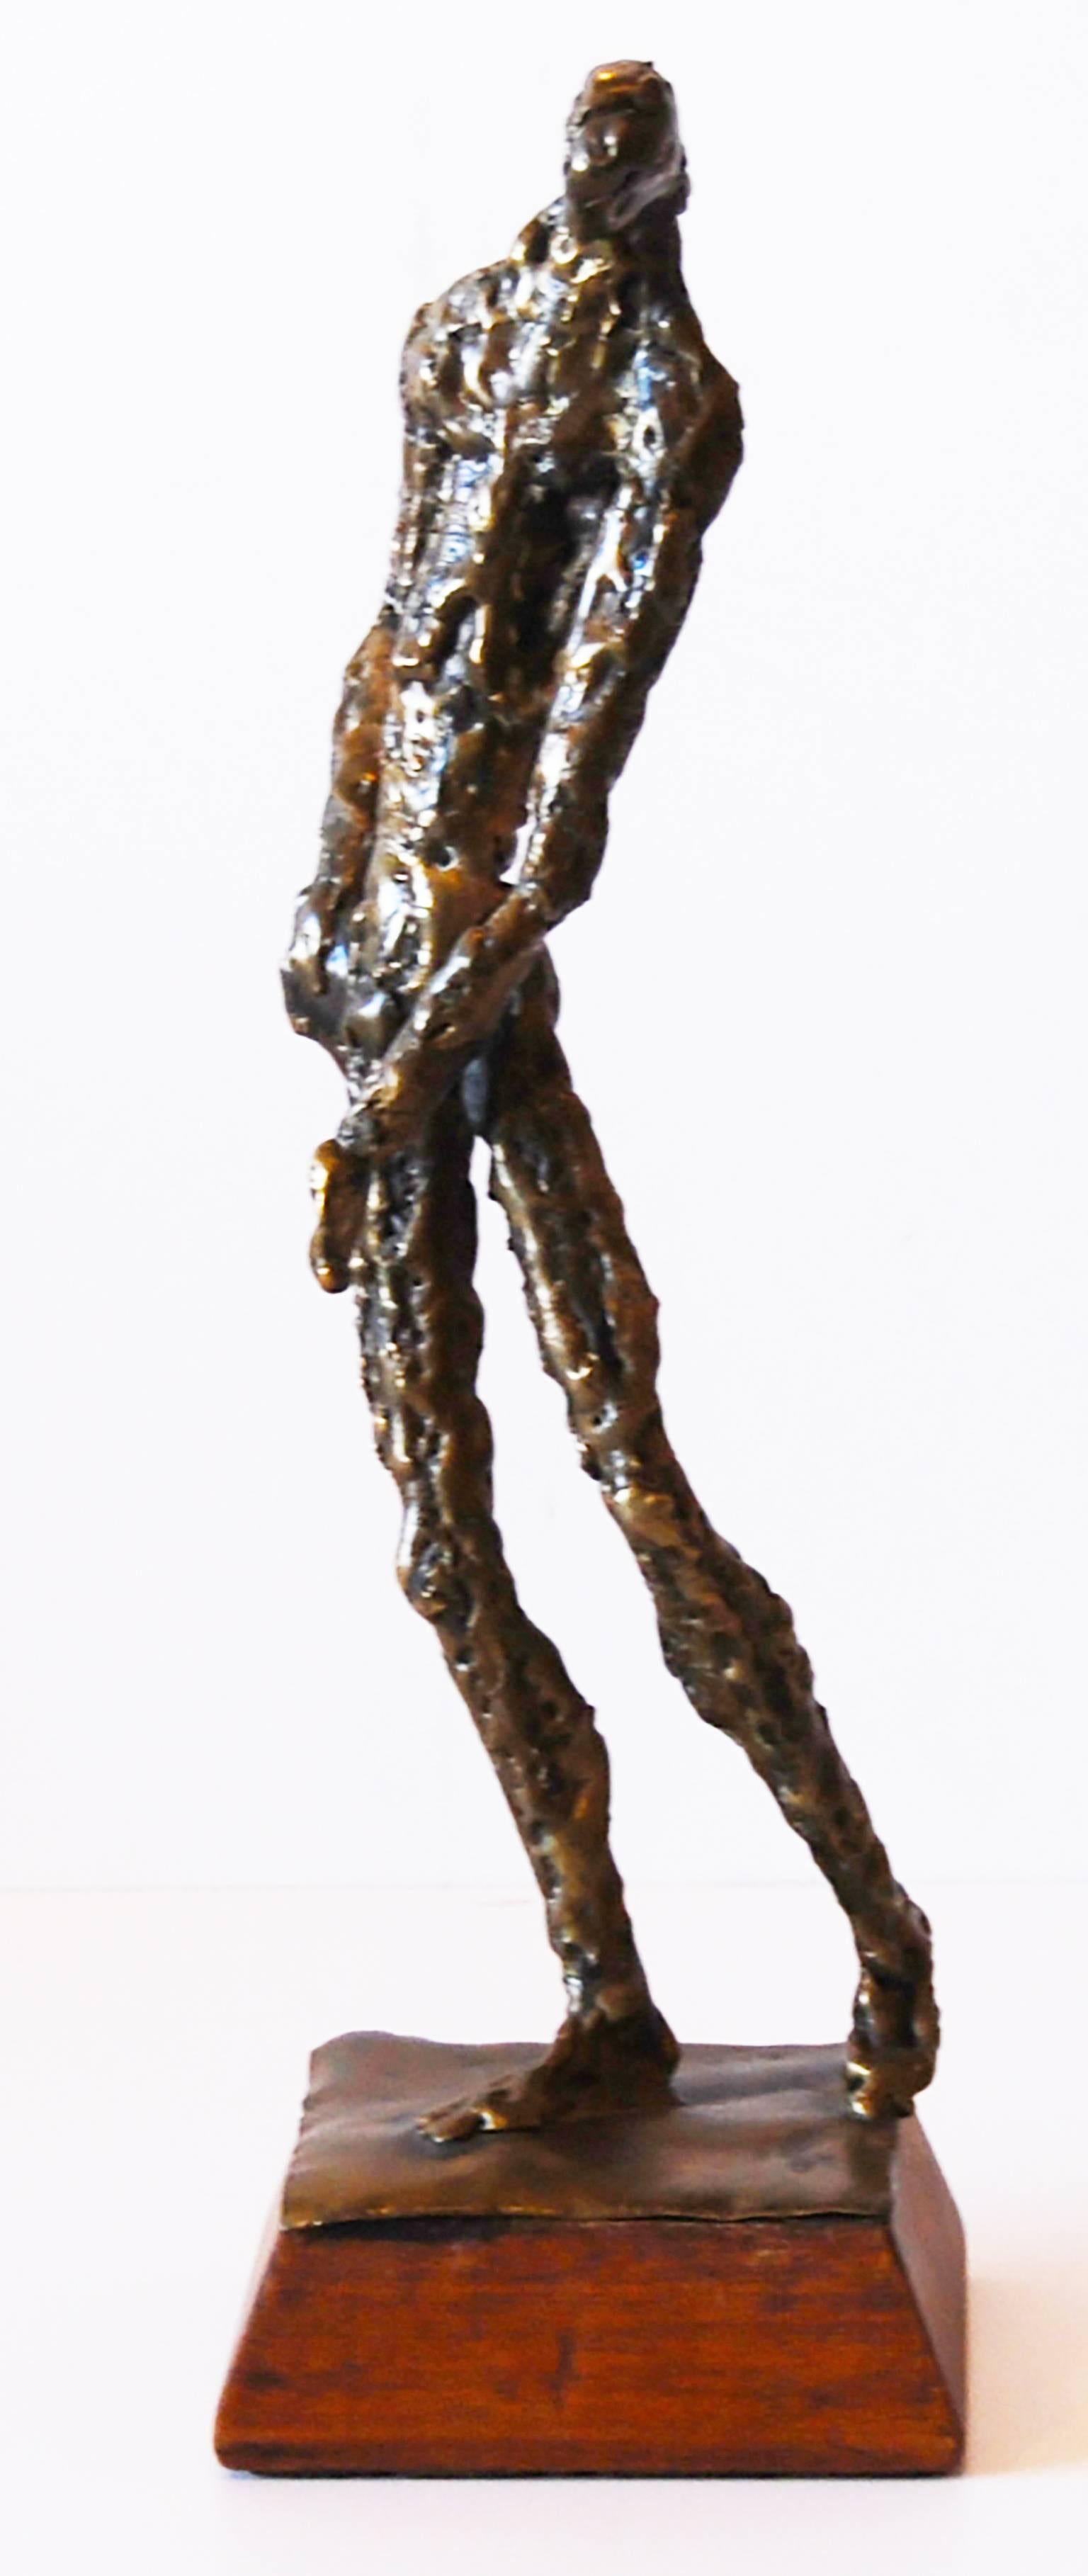 Giacometti style sculpture on a wood base.